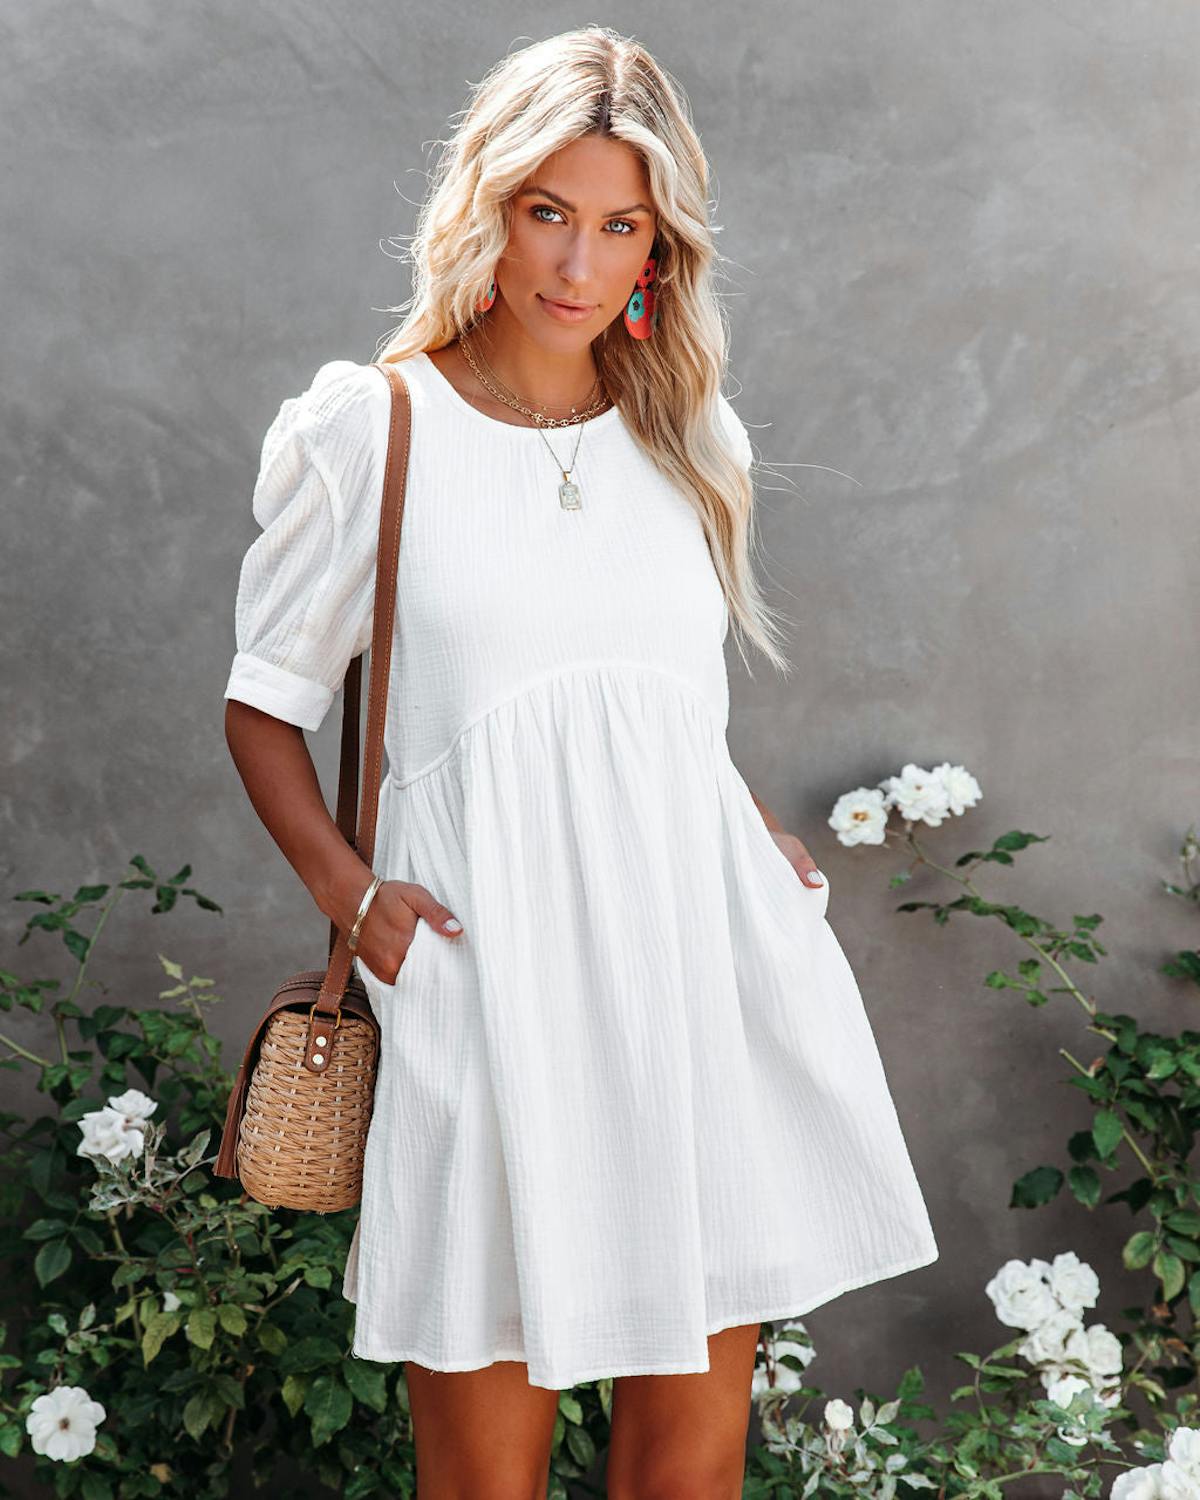 Amber Cotton Pocketed Puff Sleeve Dress - White - FINAL SALE view 1